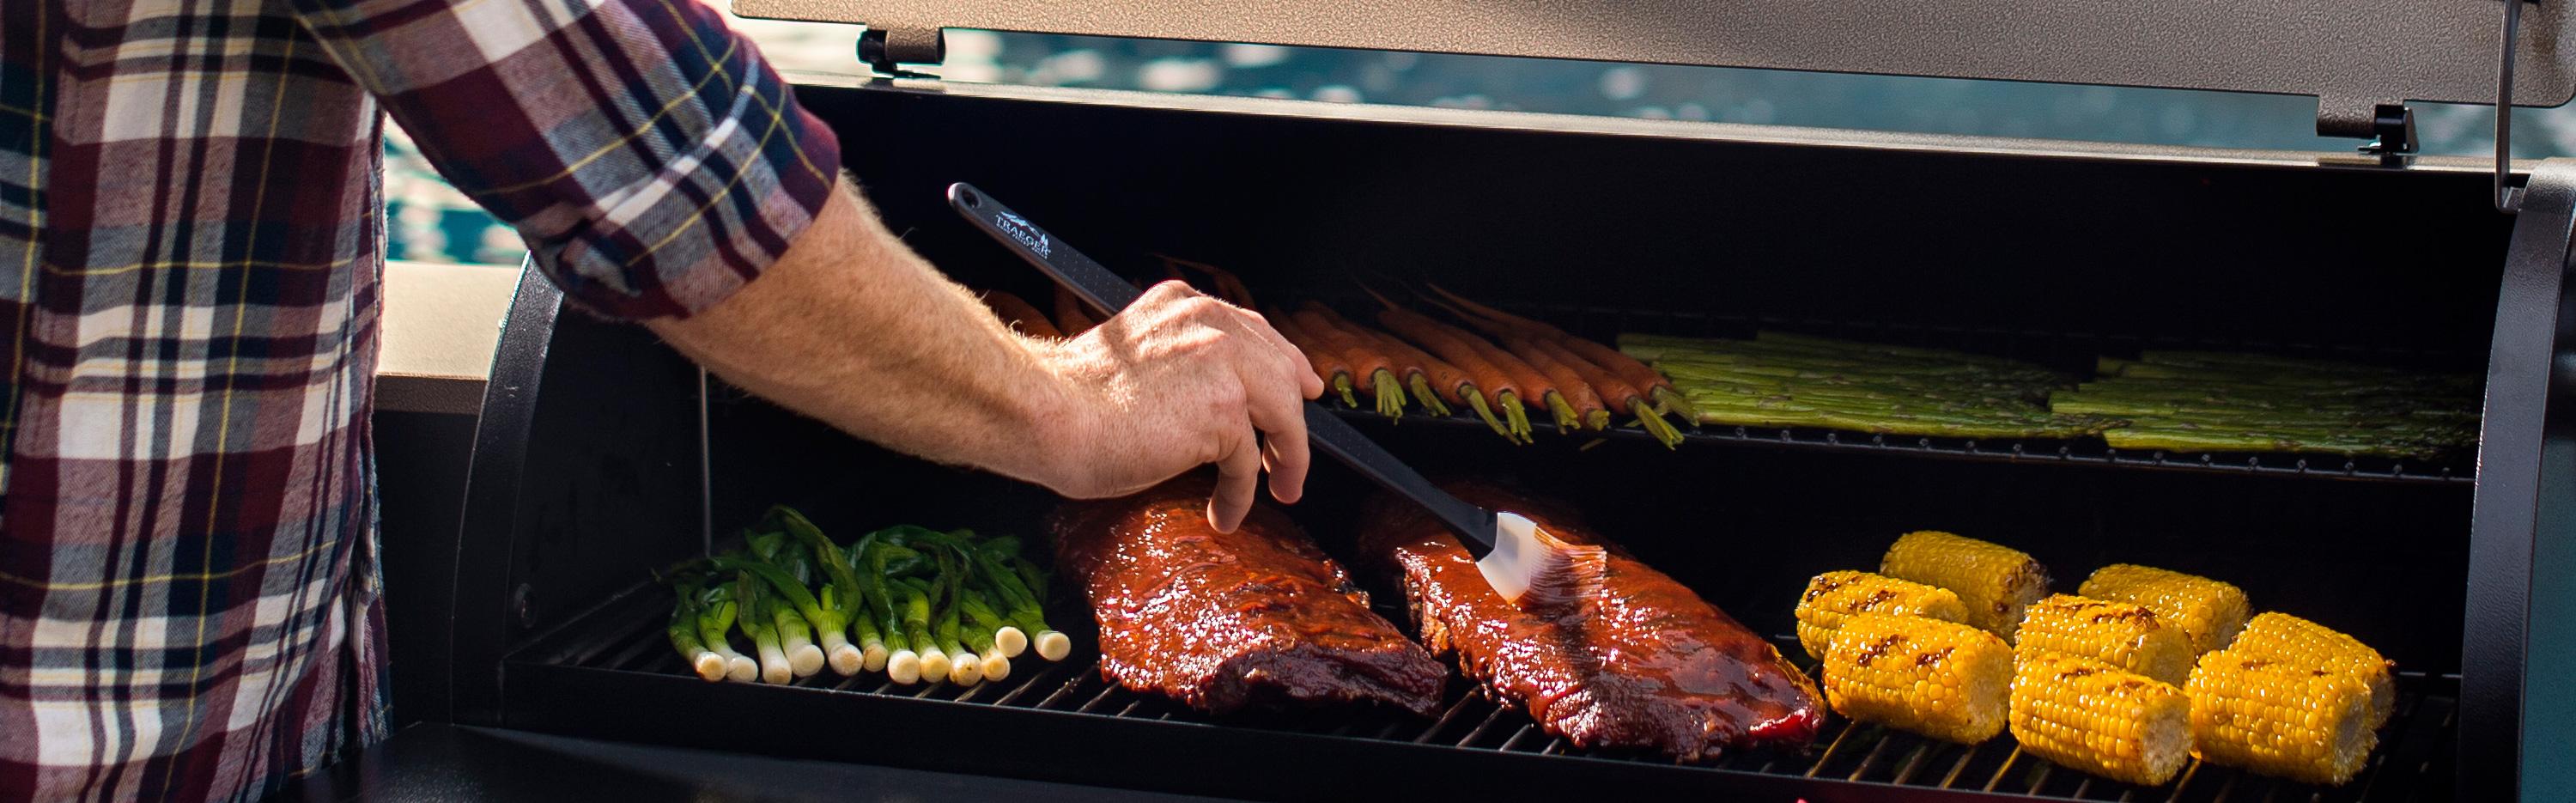 Ribs and vegetables grilling on on a Traeger wood pellet grill